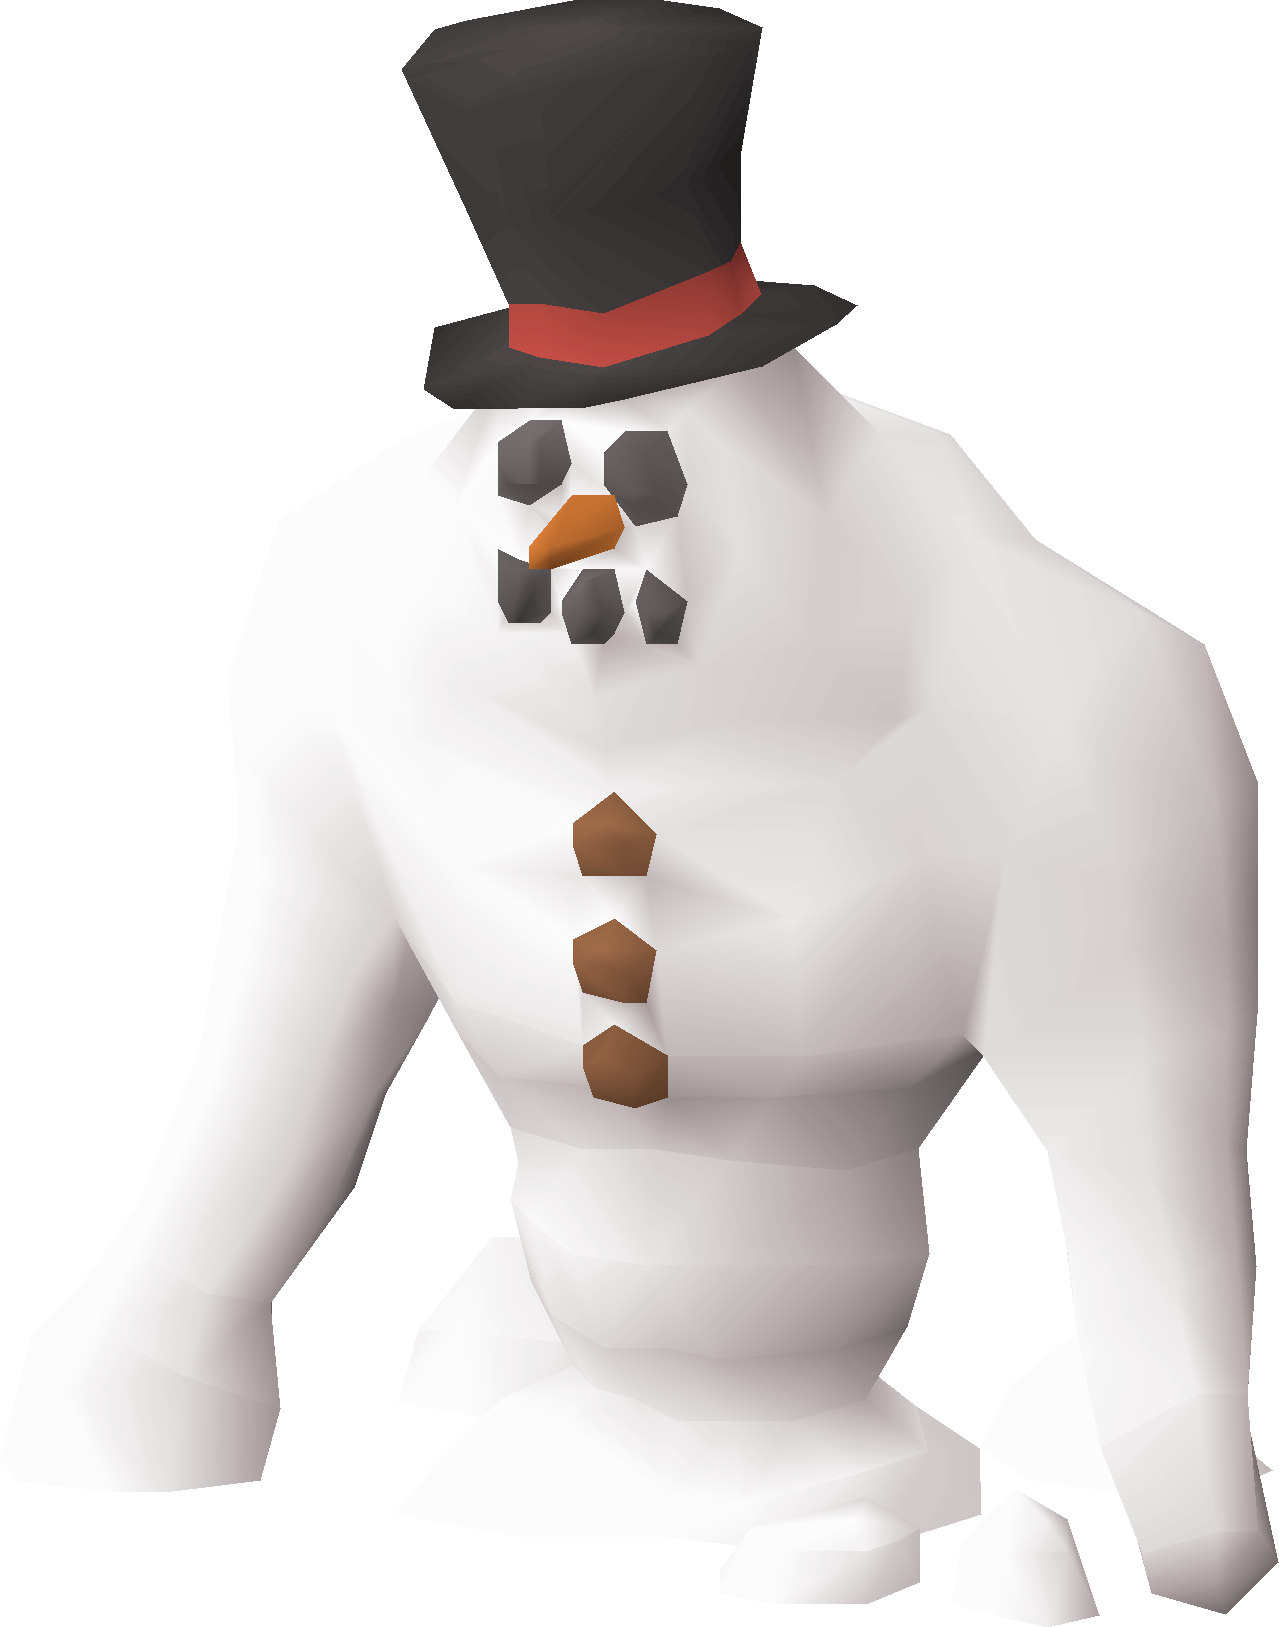 A player transformed into a Tempy snowman.